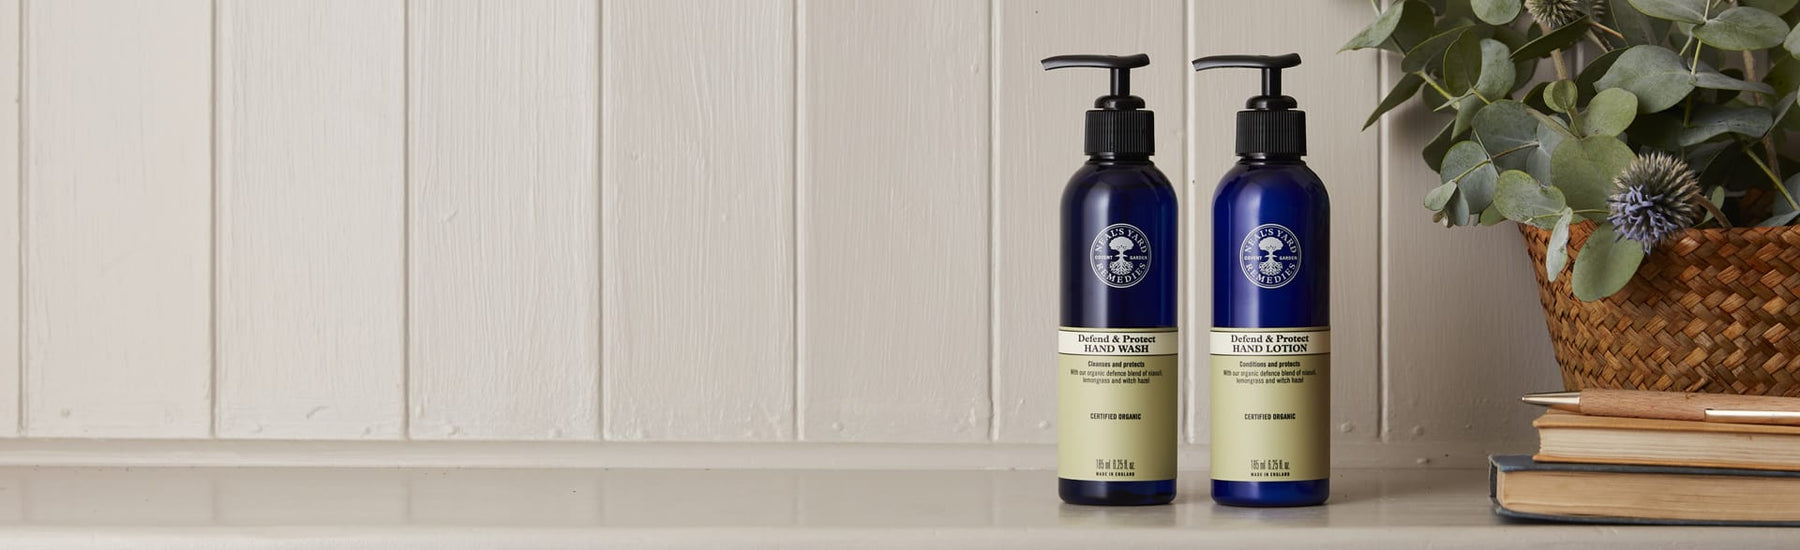 Picture of two hand defence sanitiser products by Neal's Yard Remedies